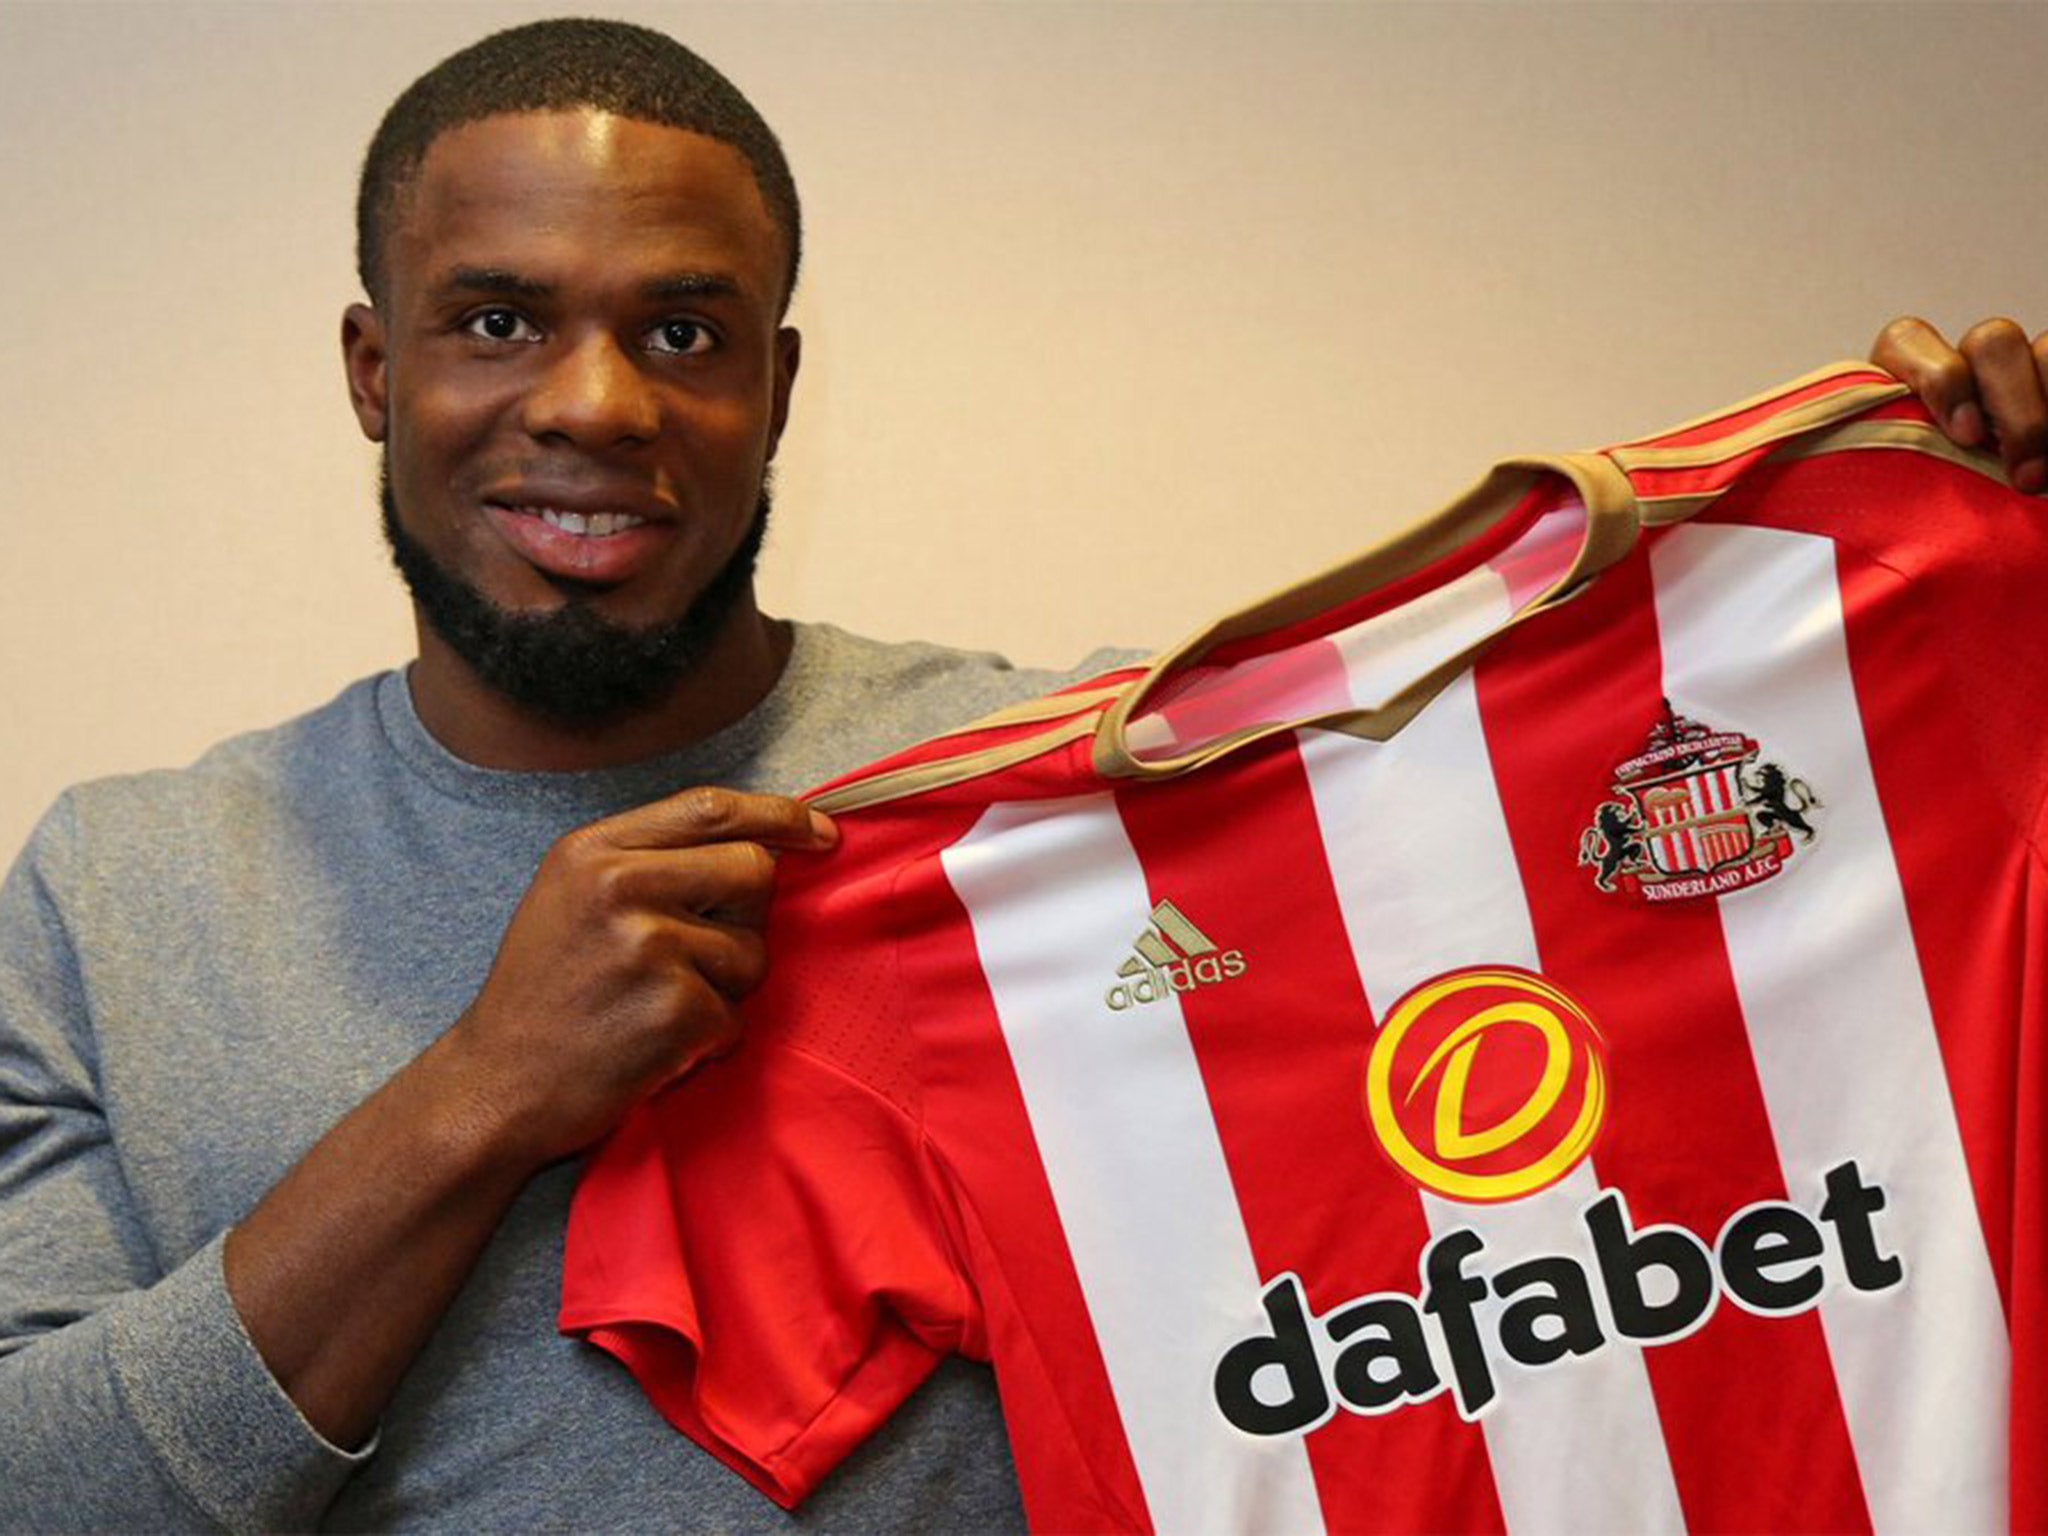 Victor Anichebe posted a hilarious Twitter message before deleting it